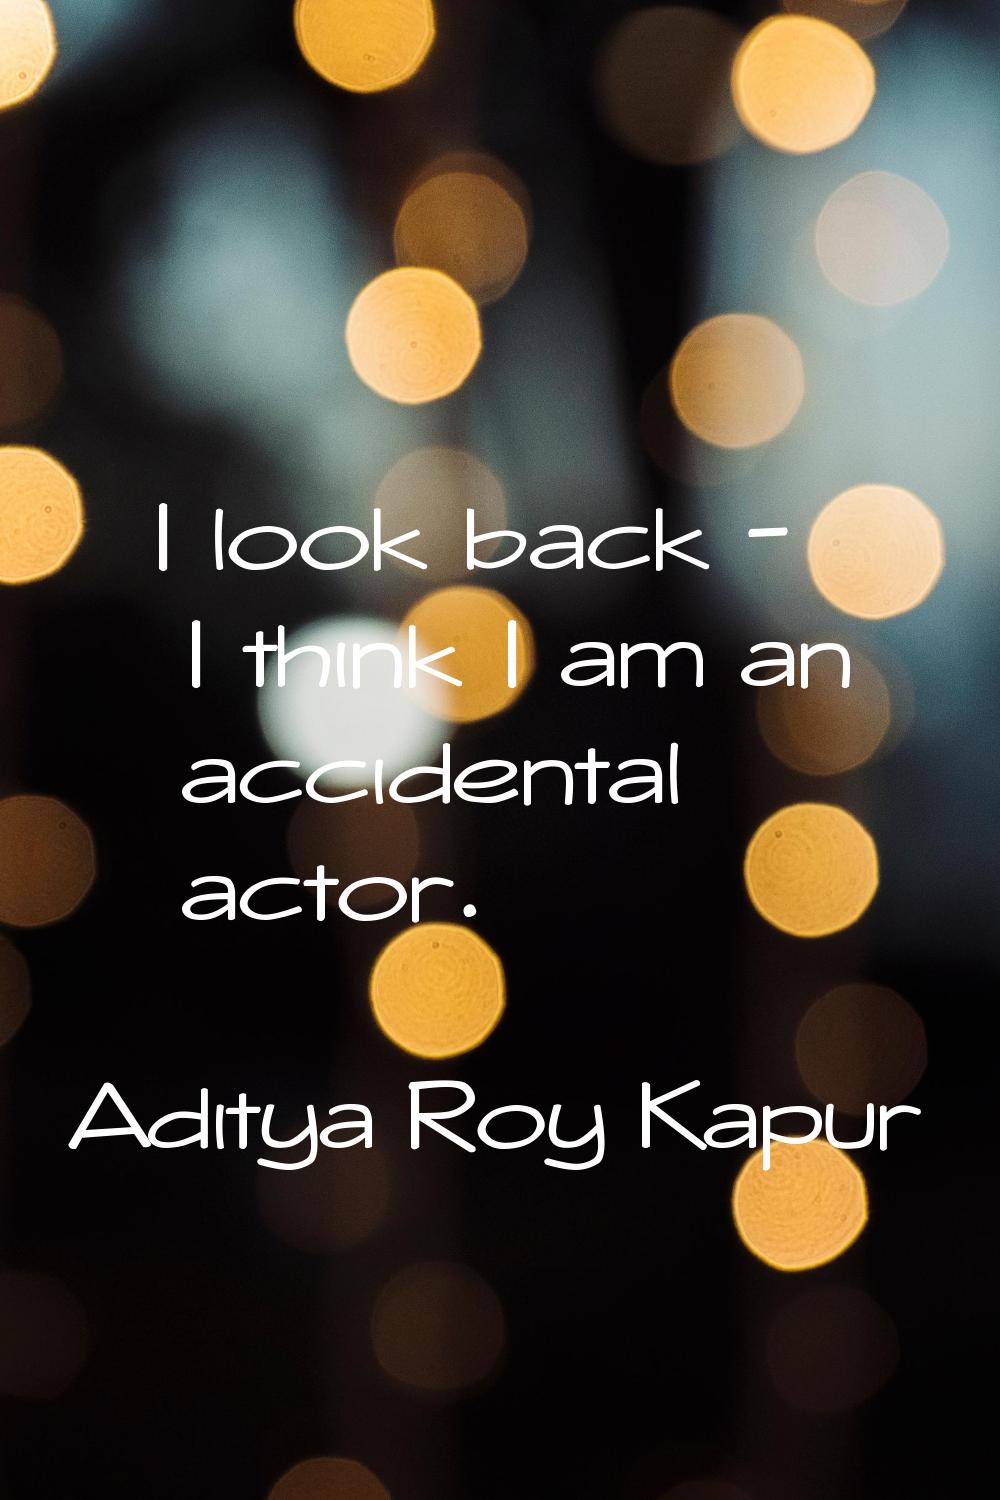 I look back - I think I am an accidental actor.